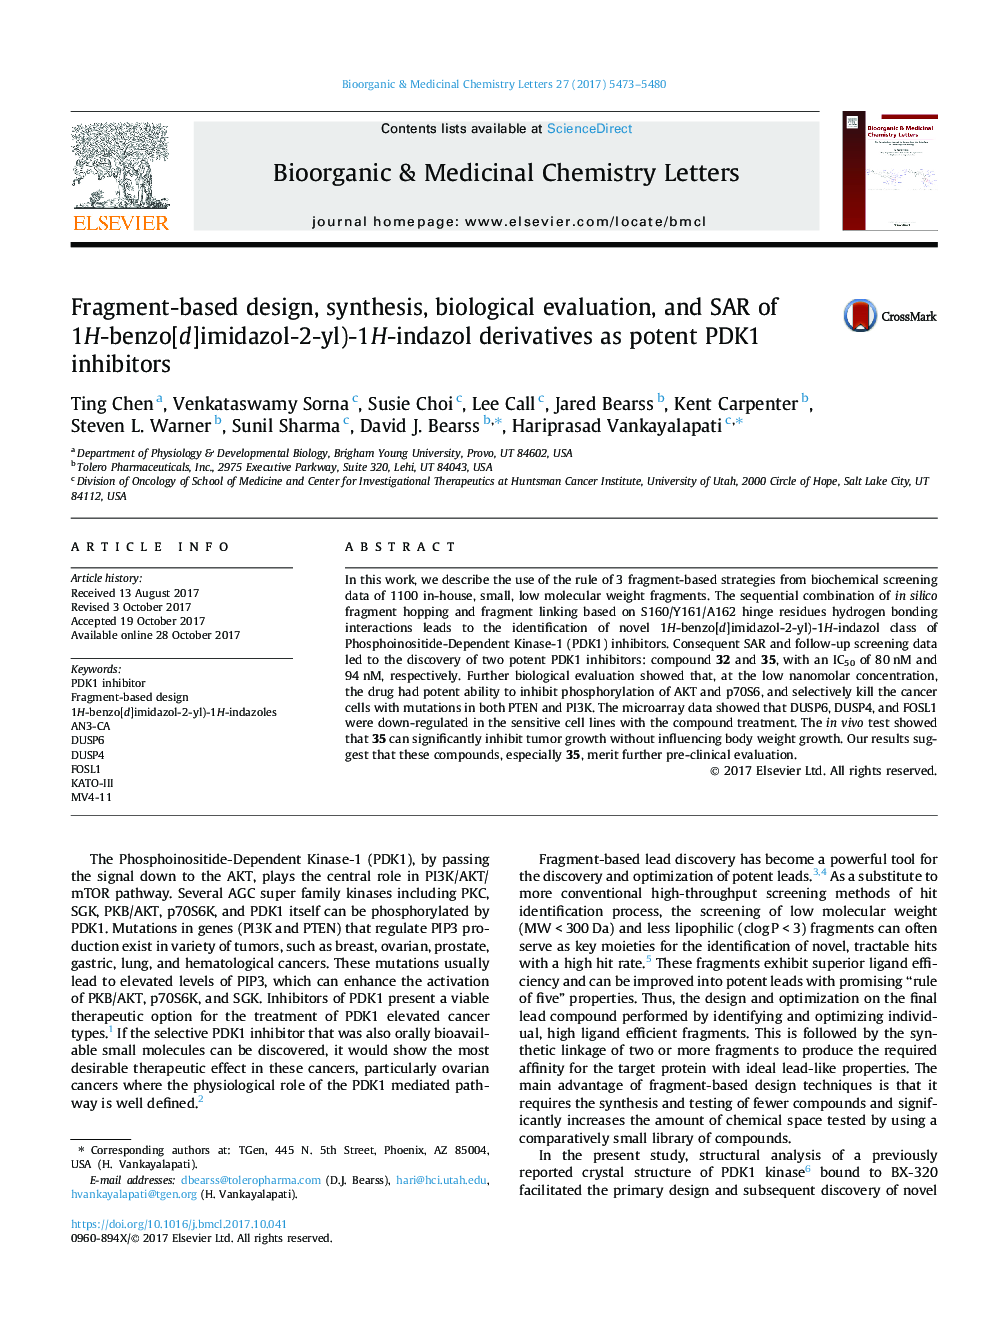 Fragment-based design, synthesis, biological evaluation, and SAR of 1H-benzo[d]imidazol-2-yl)-1H-indazol derivatives as potent PDK1 inhibitors